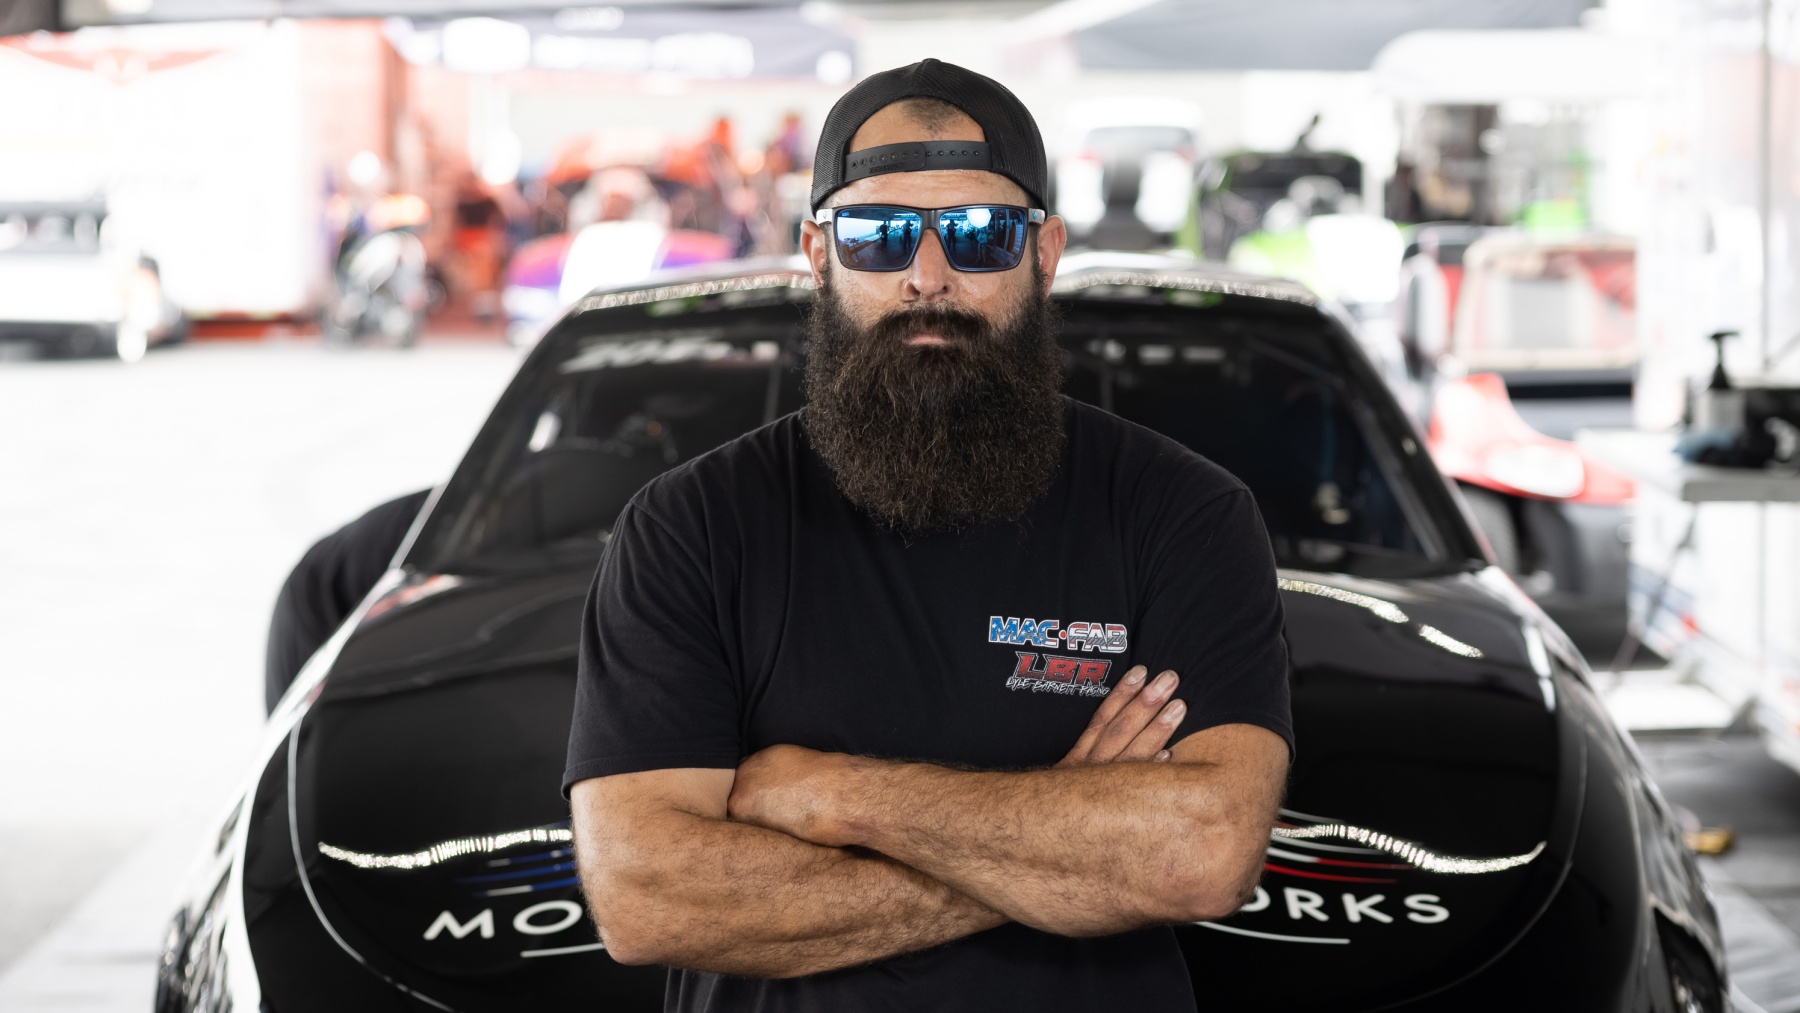 \'We\'re Off\' Drag With Lyle Opinion, on More Photos, News, WSOPM: Barnett Illustrated Cuffs | Videos Coming Racing Drag the | and Interviews,